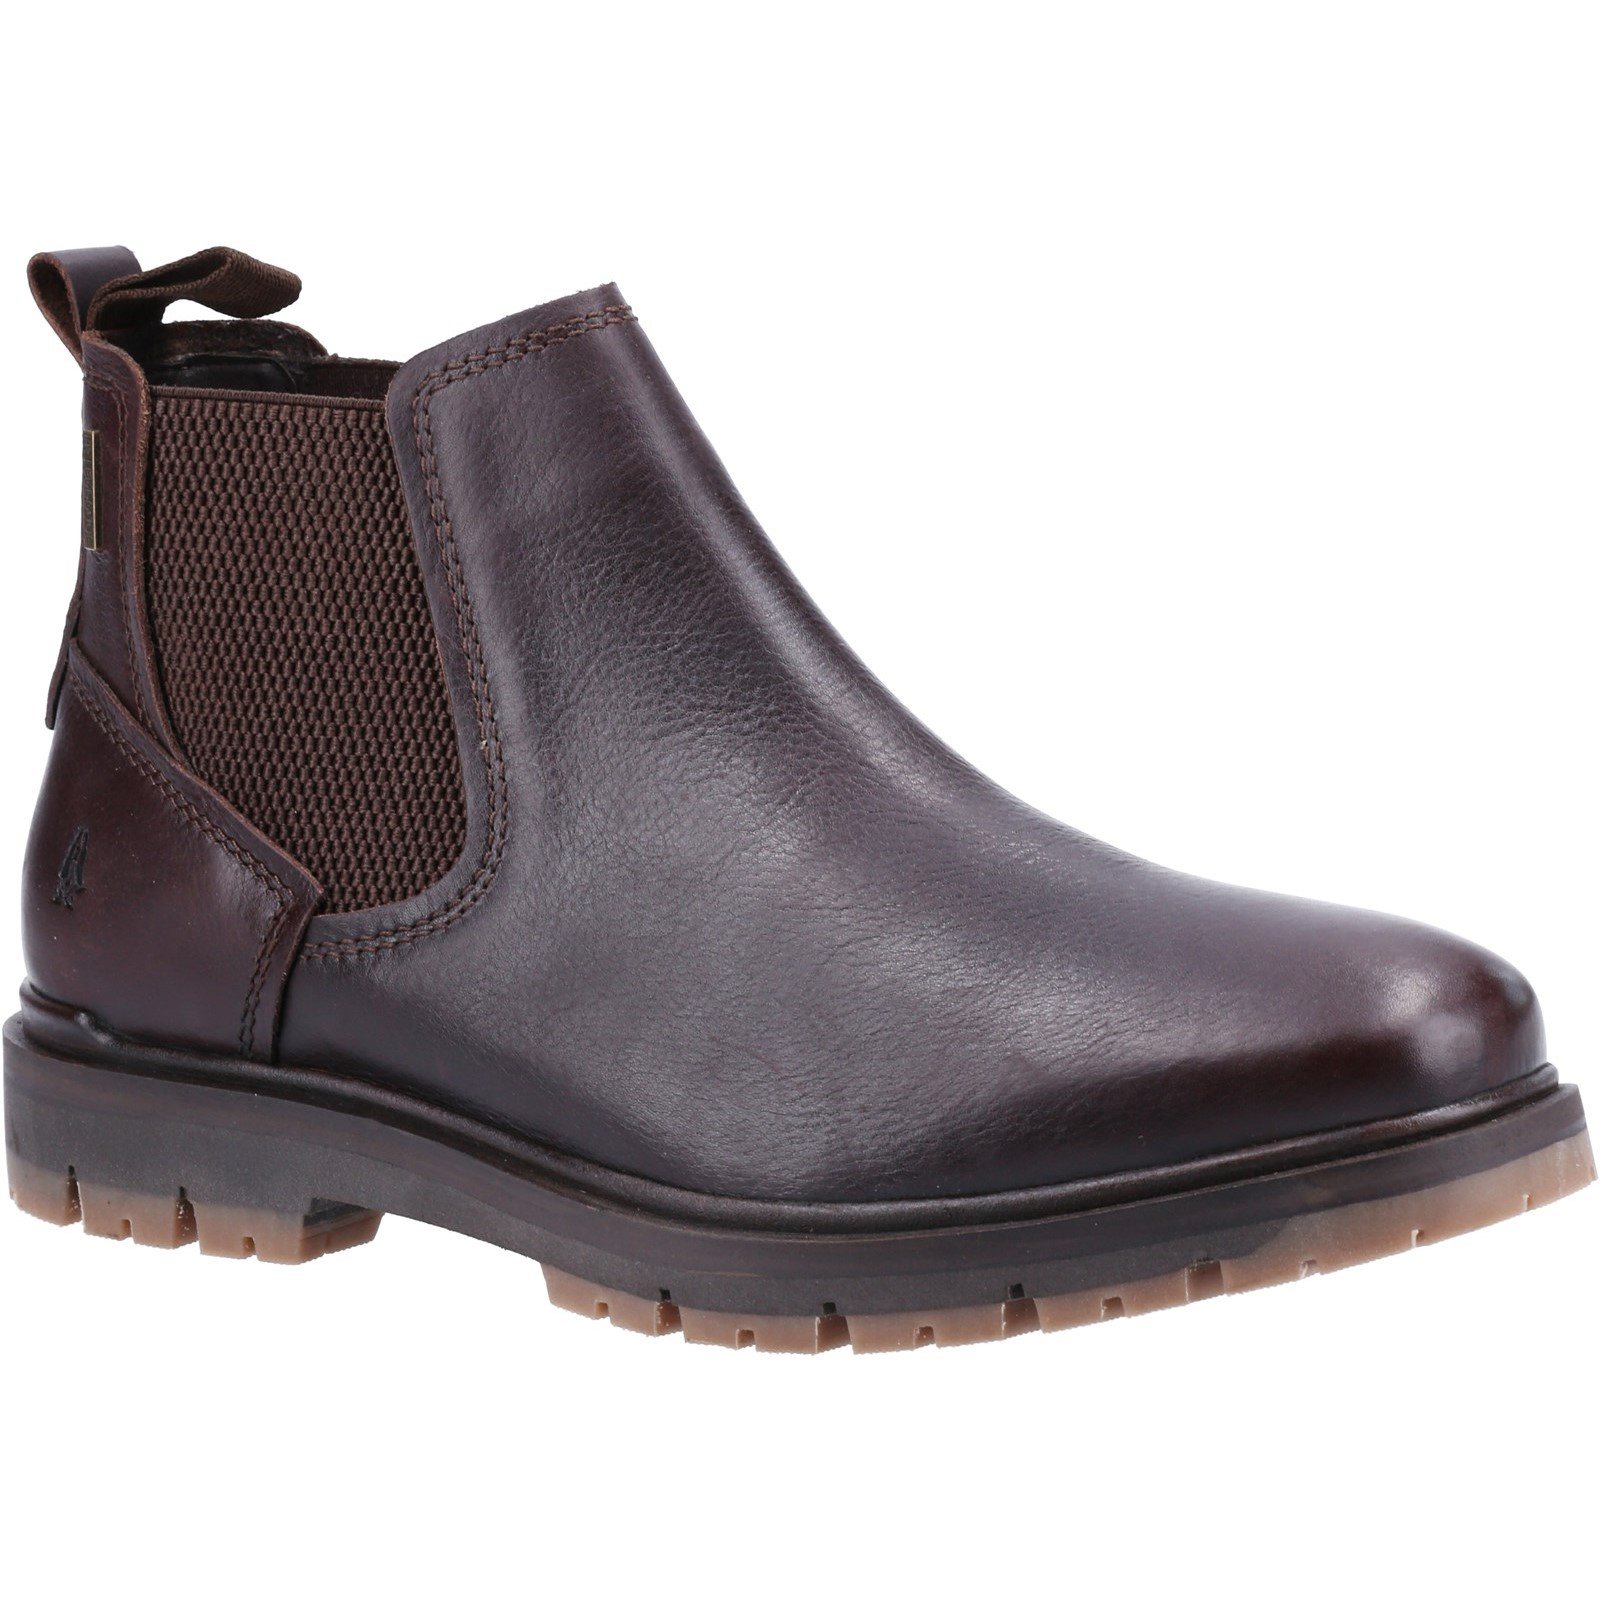 Hush Puppies Men's Paxton Chelsea Boot Various Colours 32882 - Brown 10